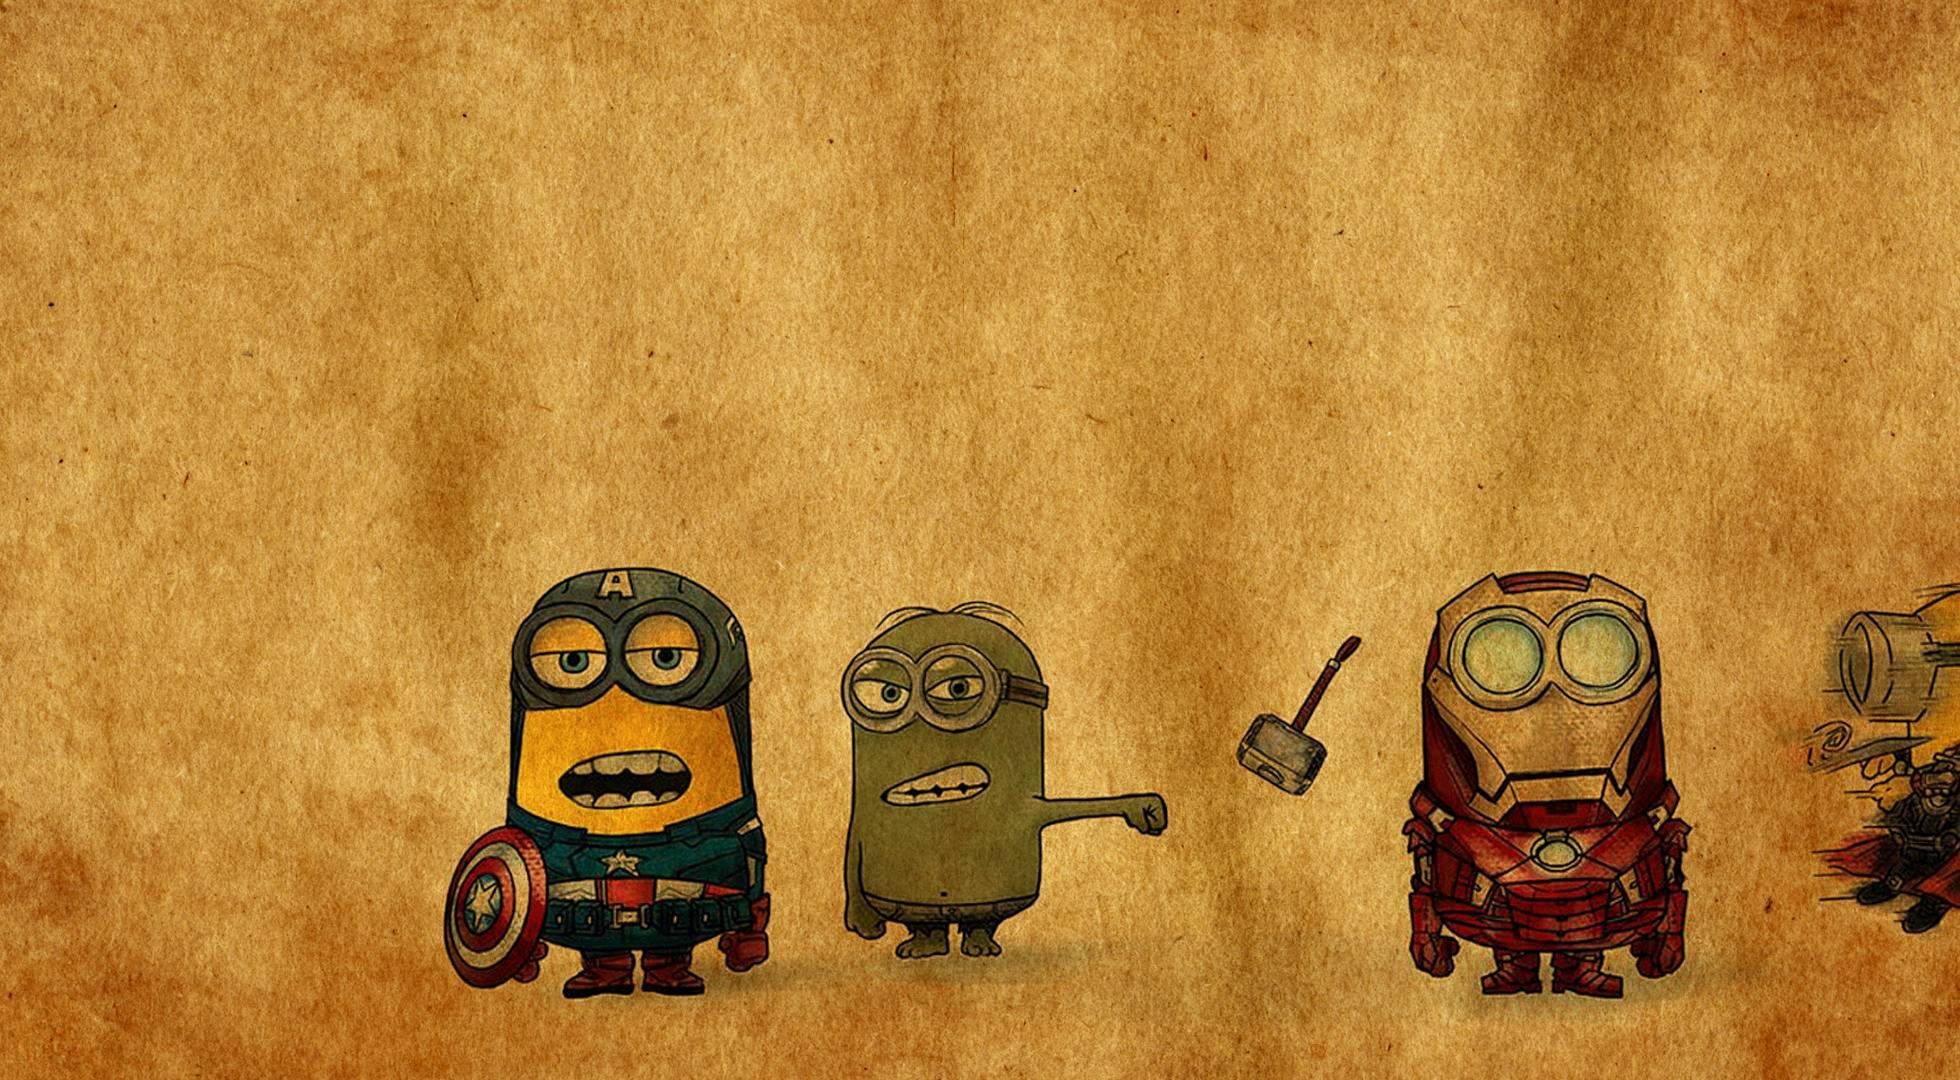 minions superheroes hd wallpapers wallpapers55com   Best Wallpapers 1960x1080